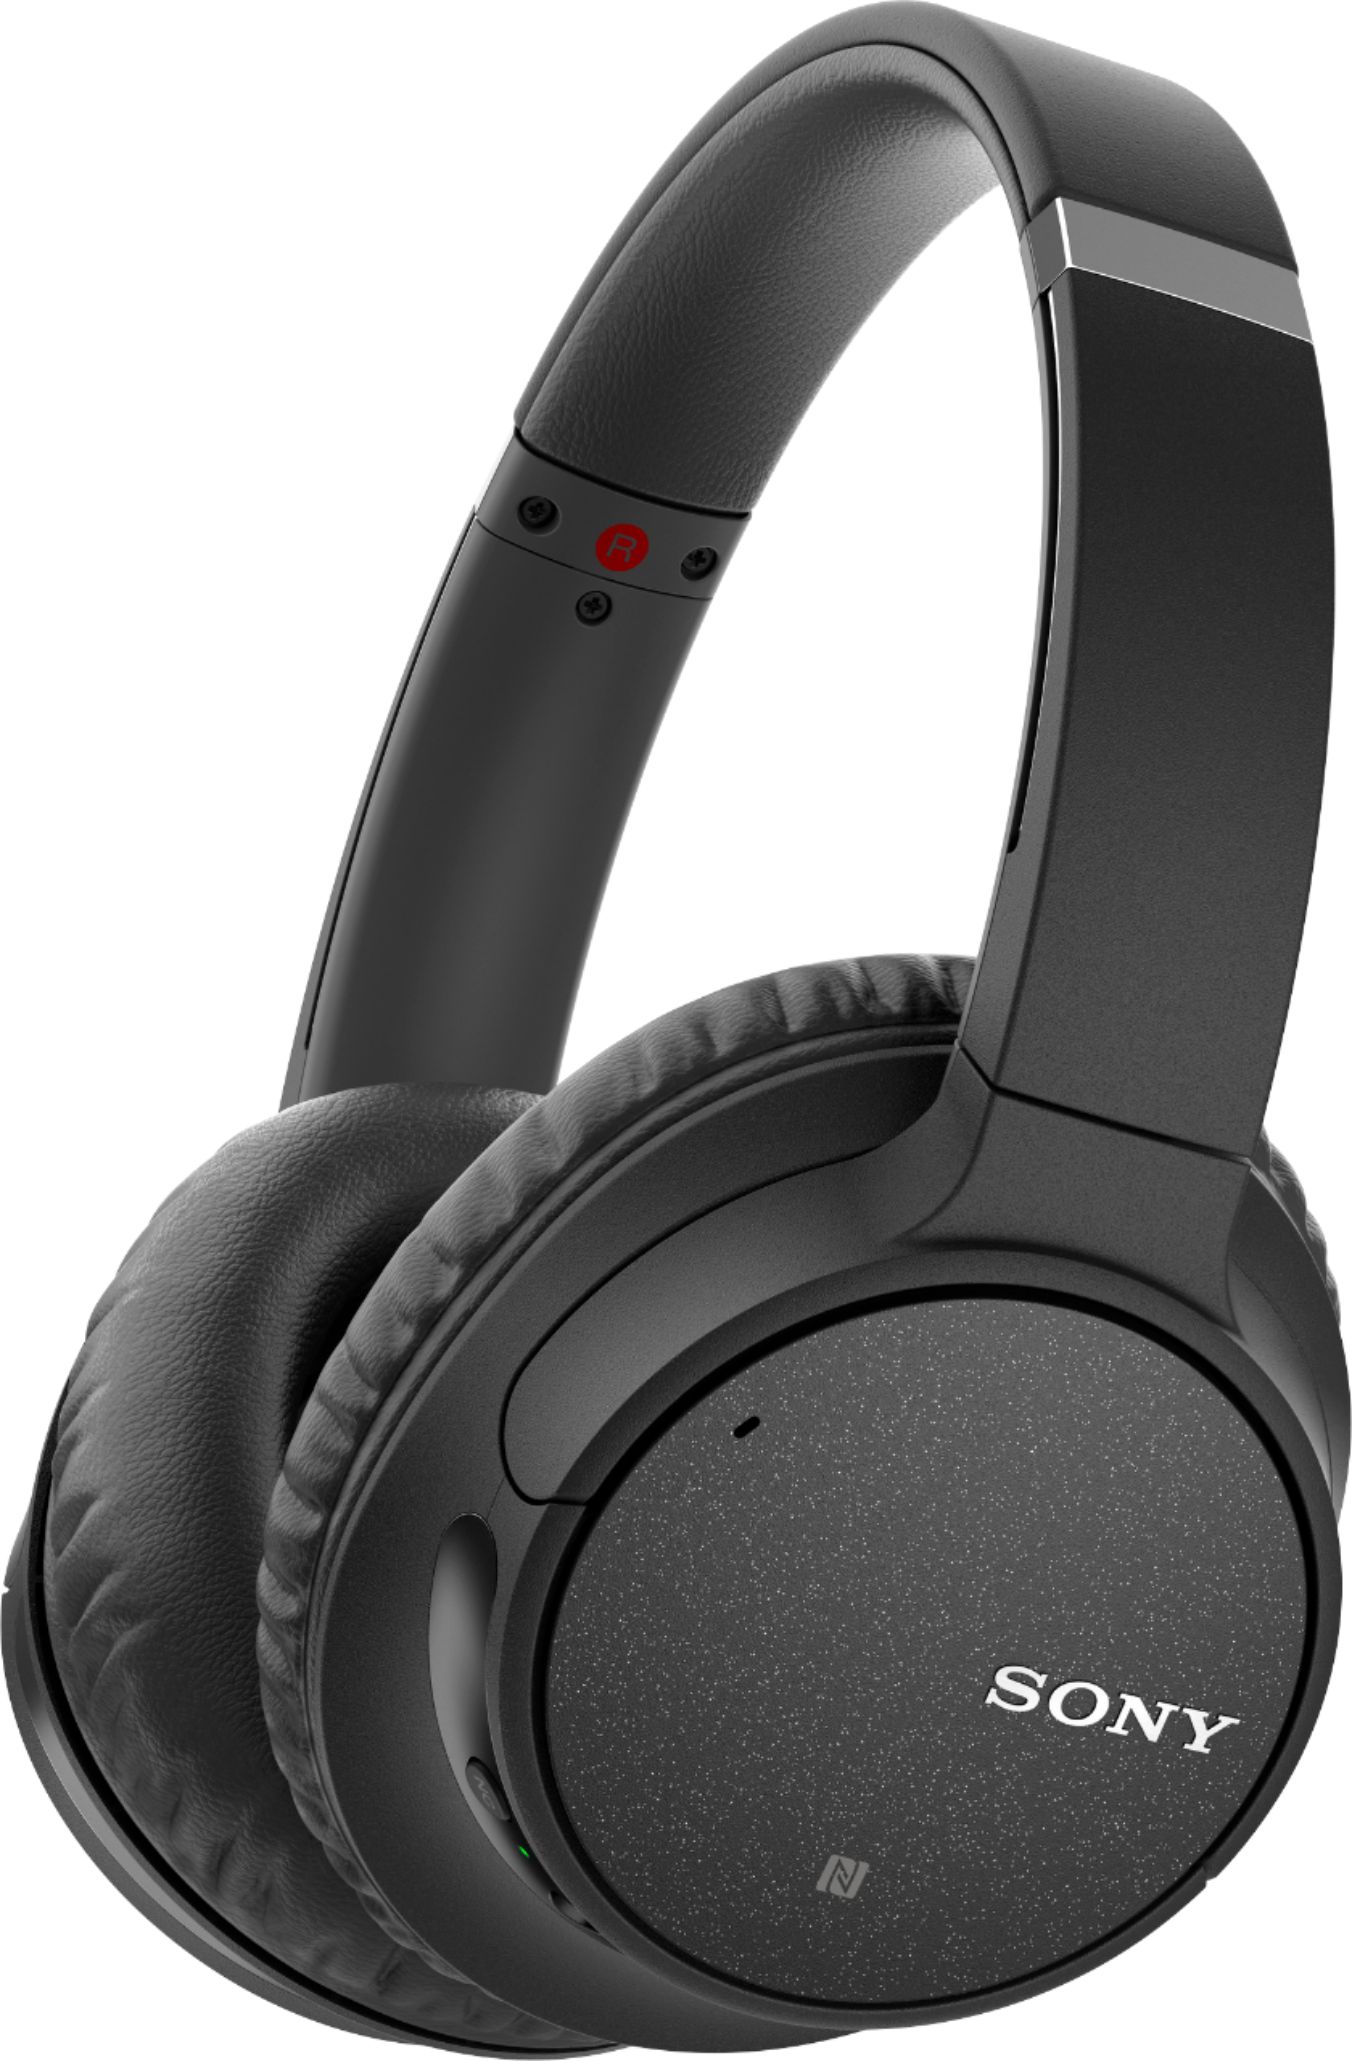 Sony WH1000XM3 Wireless Noise Canceling Over-the-Ear Headphones with Google  Assistant - Black + Deal-expo Kit 